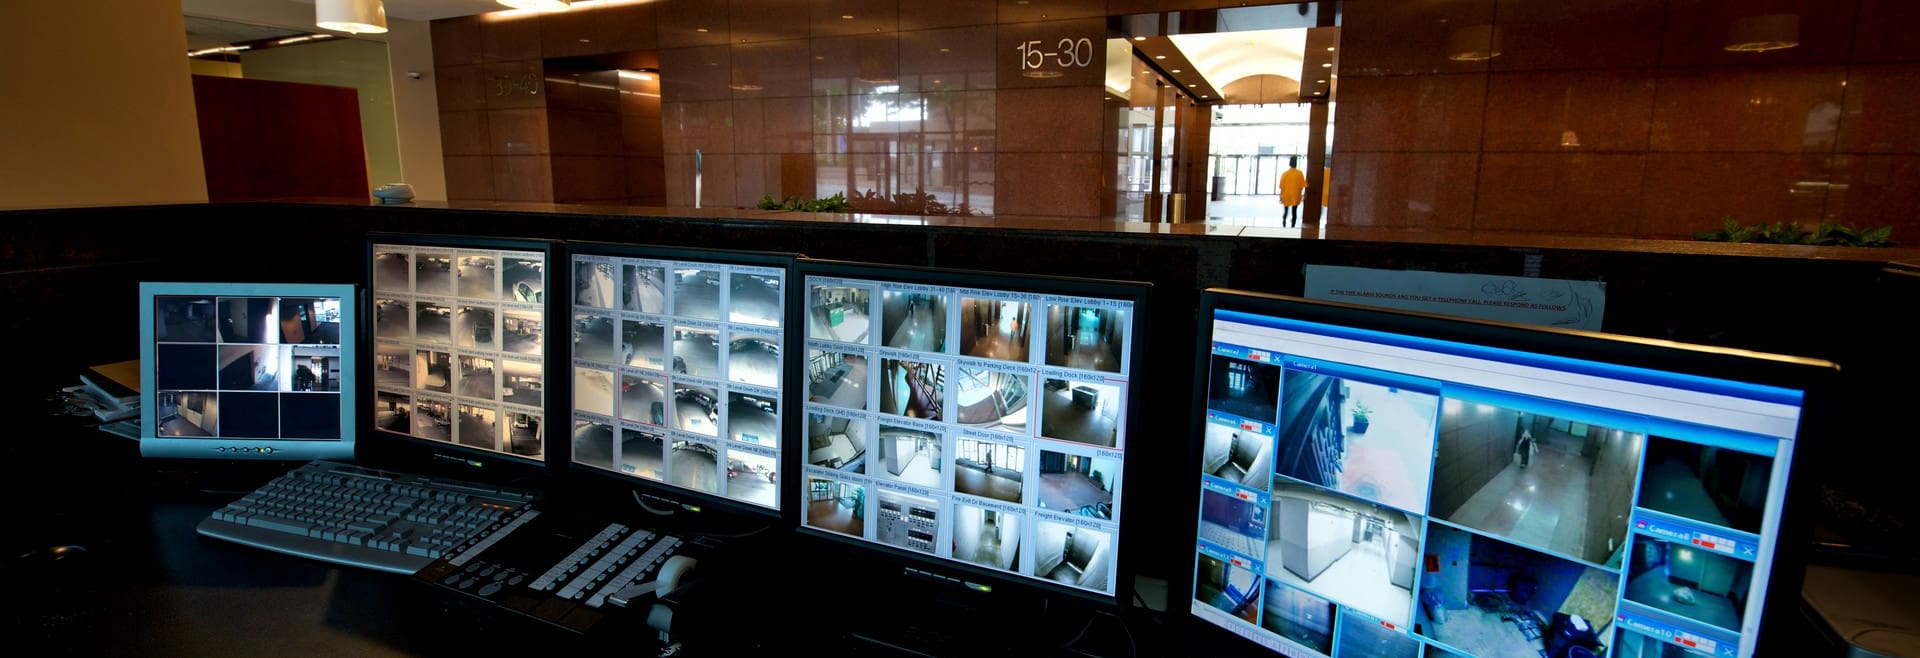 A large monitor with multiple images on it.